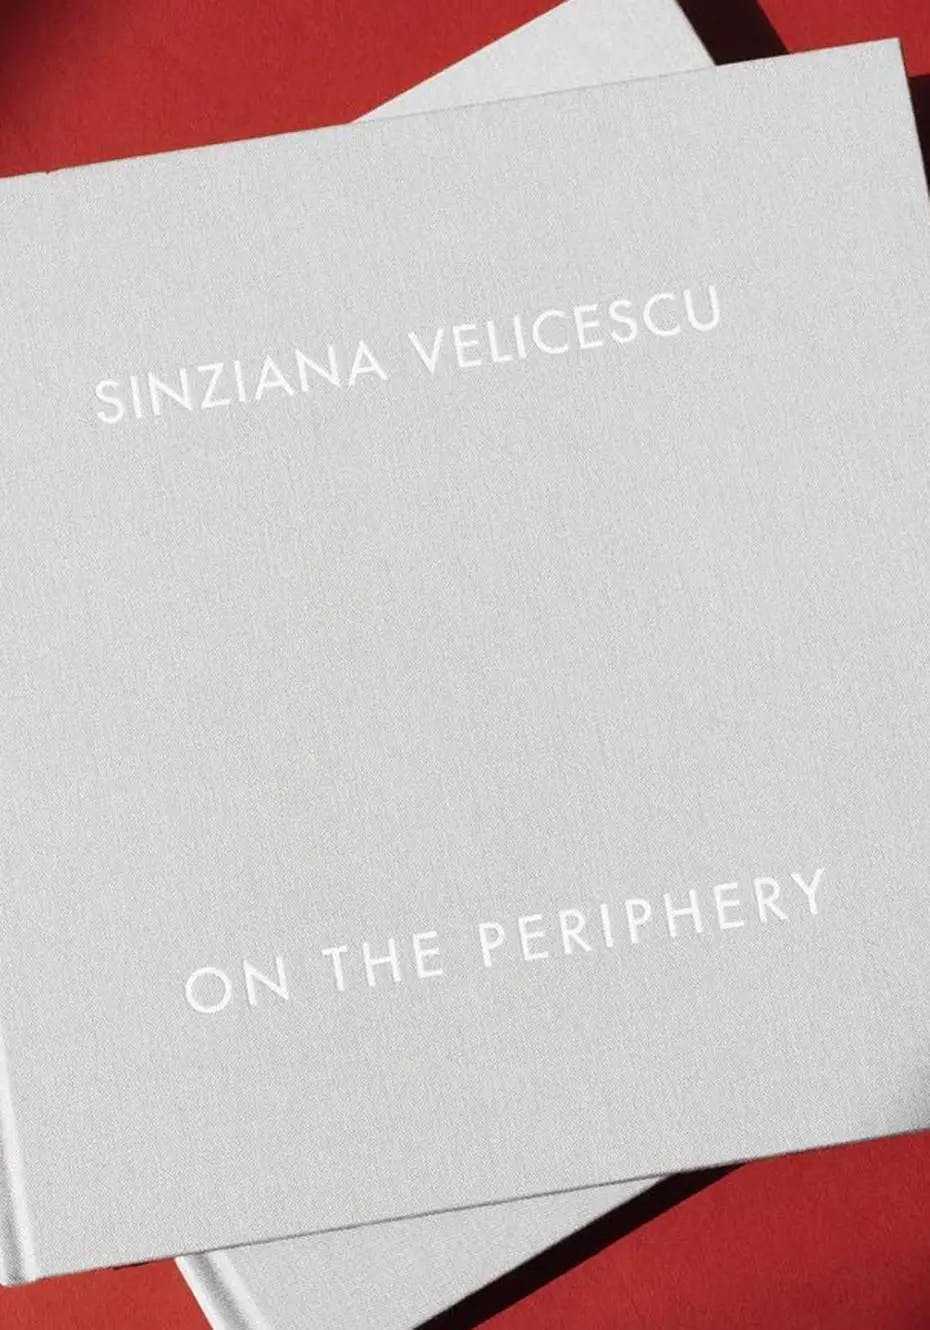 Journal: Sinziana on "On the Periphery": Gallery